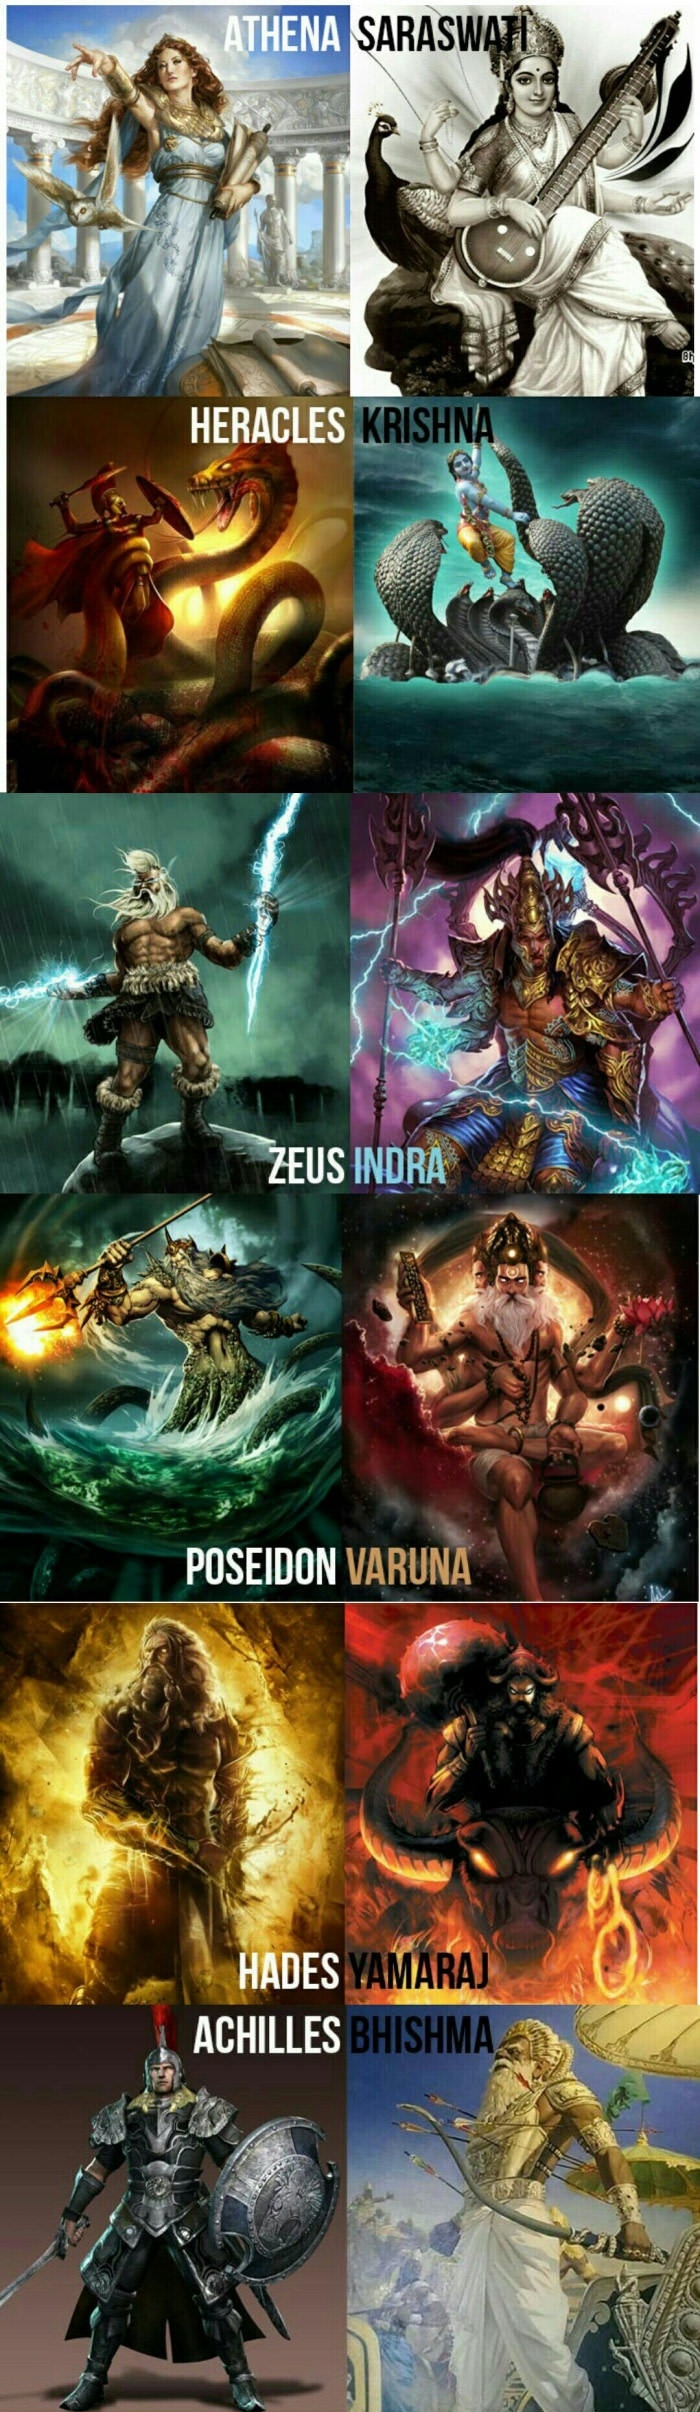 Hindu Gods and their Greek counterparts